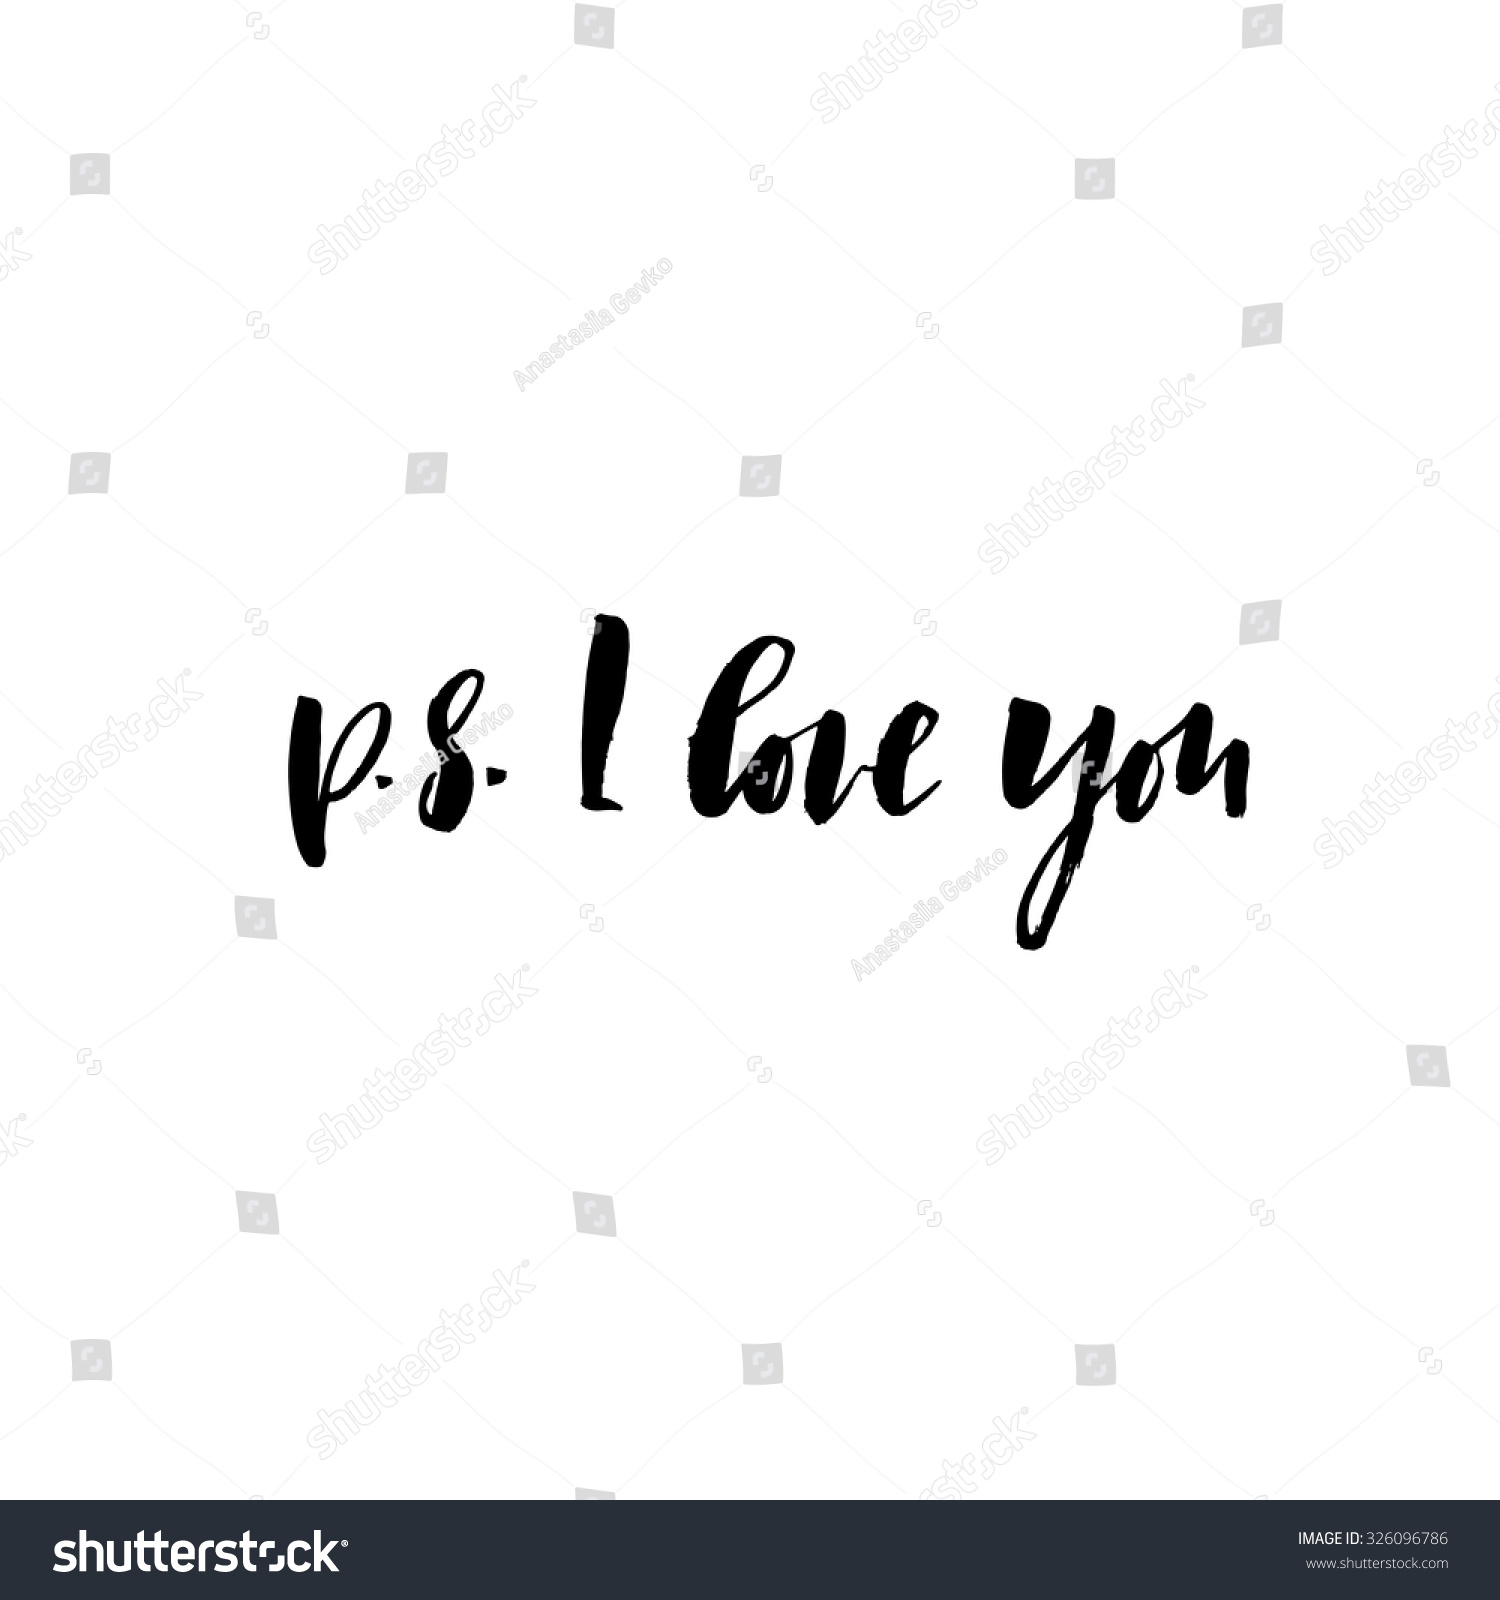 Download PS Love You Card Ink Illustration Stock Vector (Royalty ...